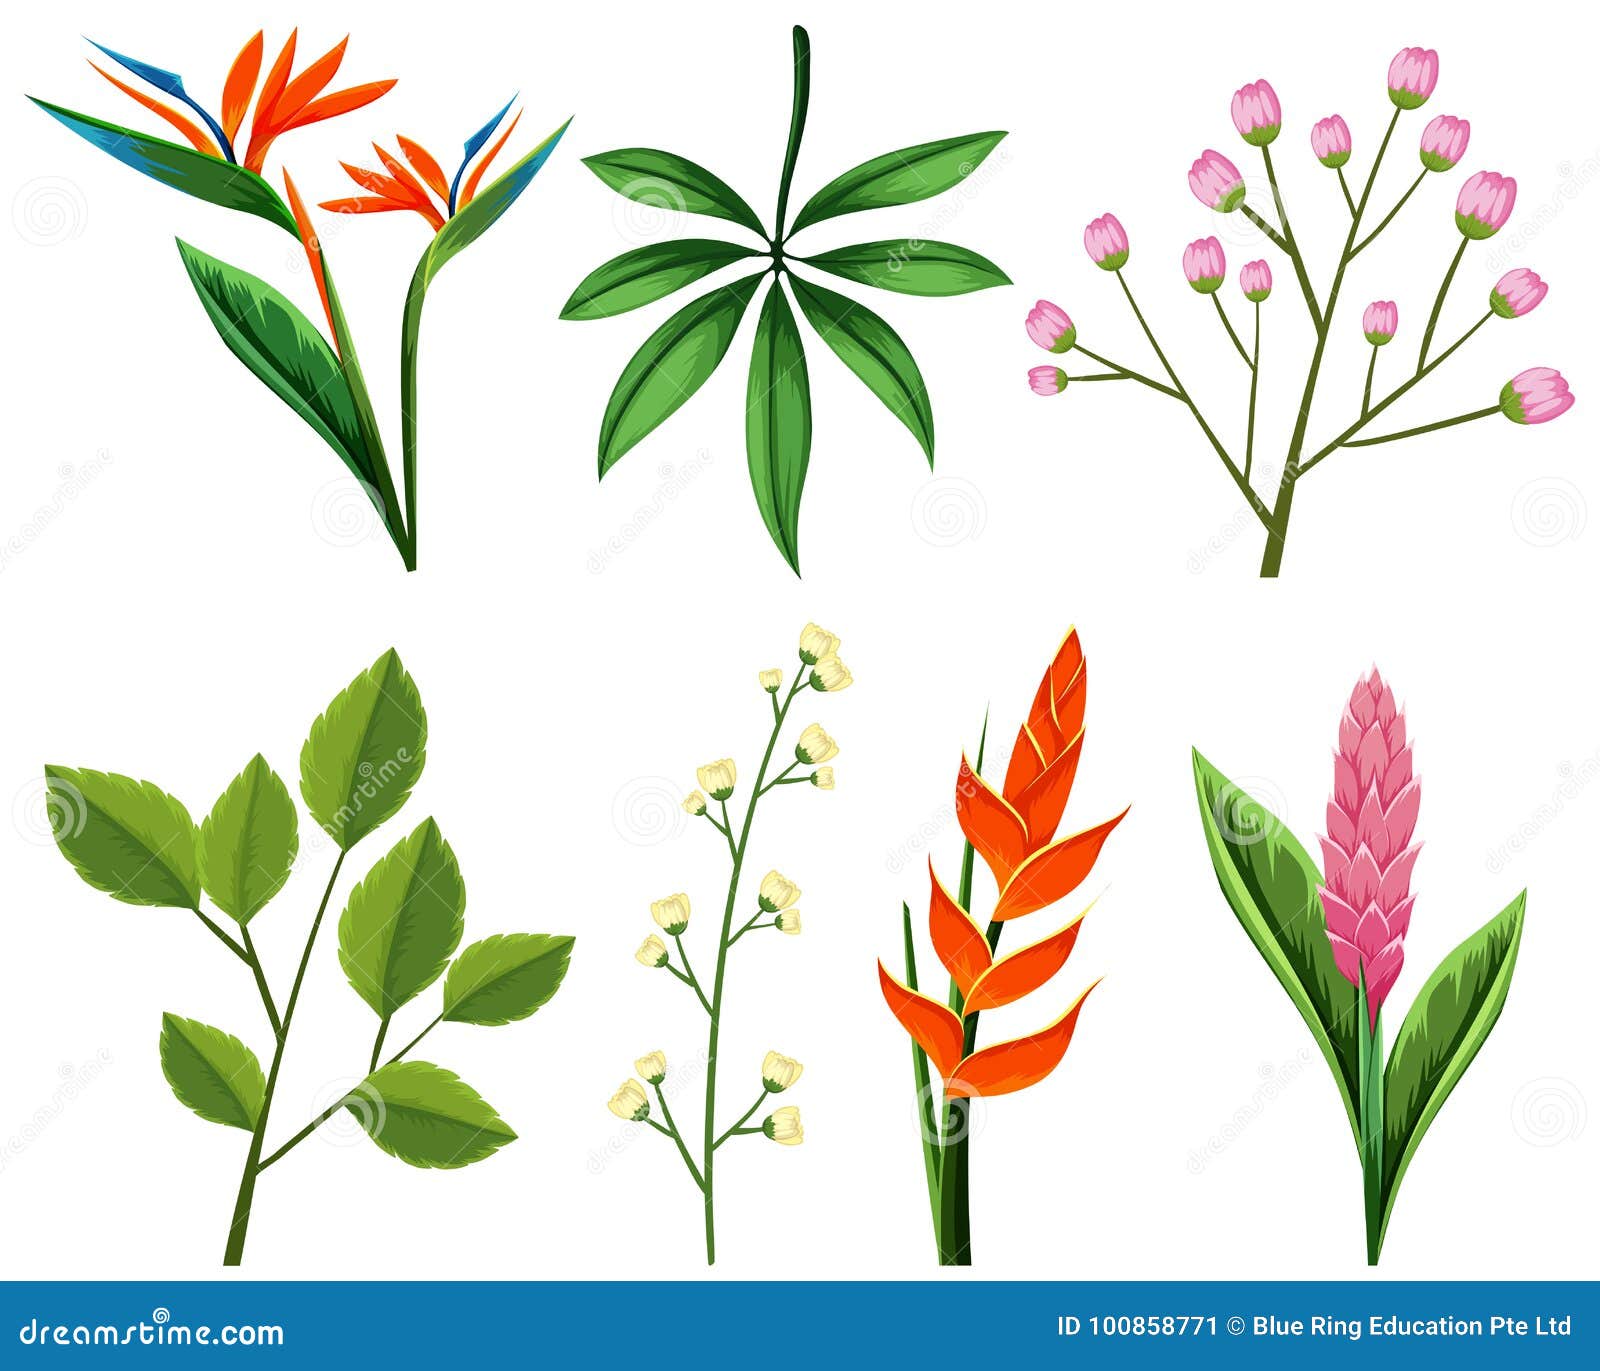 Different Types of Flowers and Leaves Stock Vector - Illustration ...